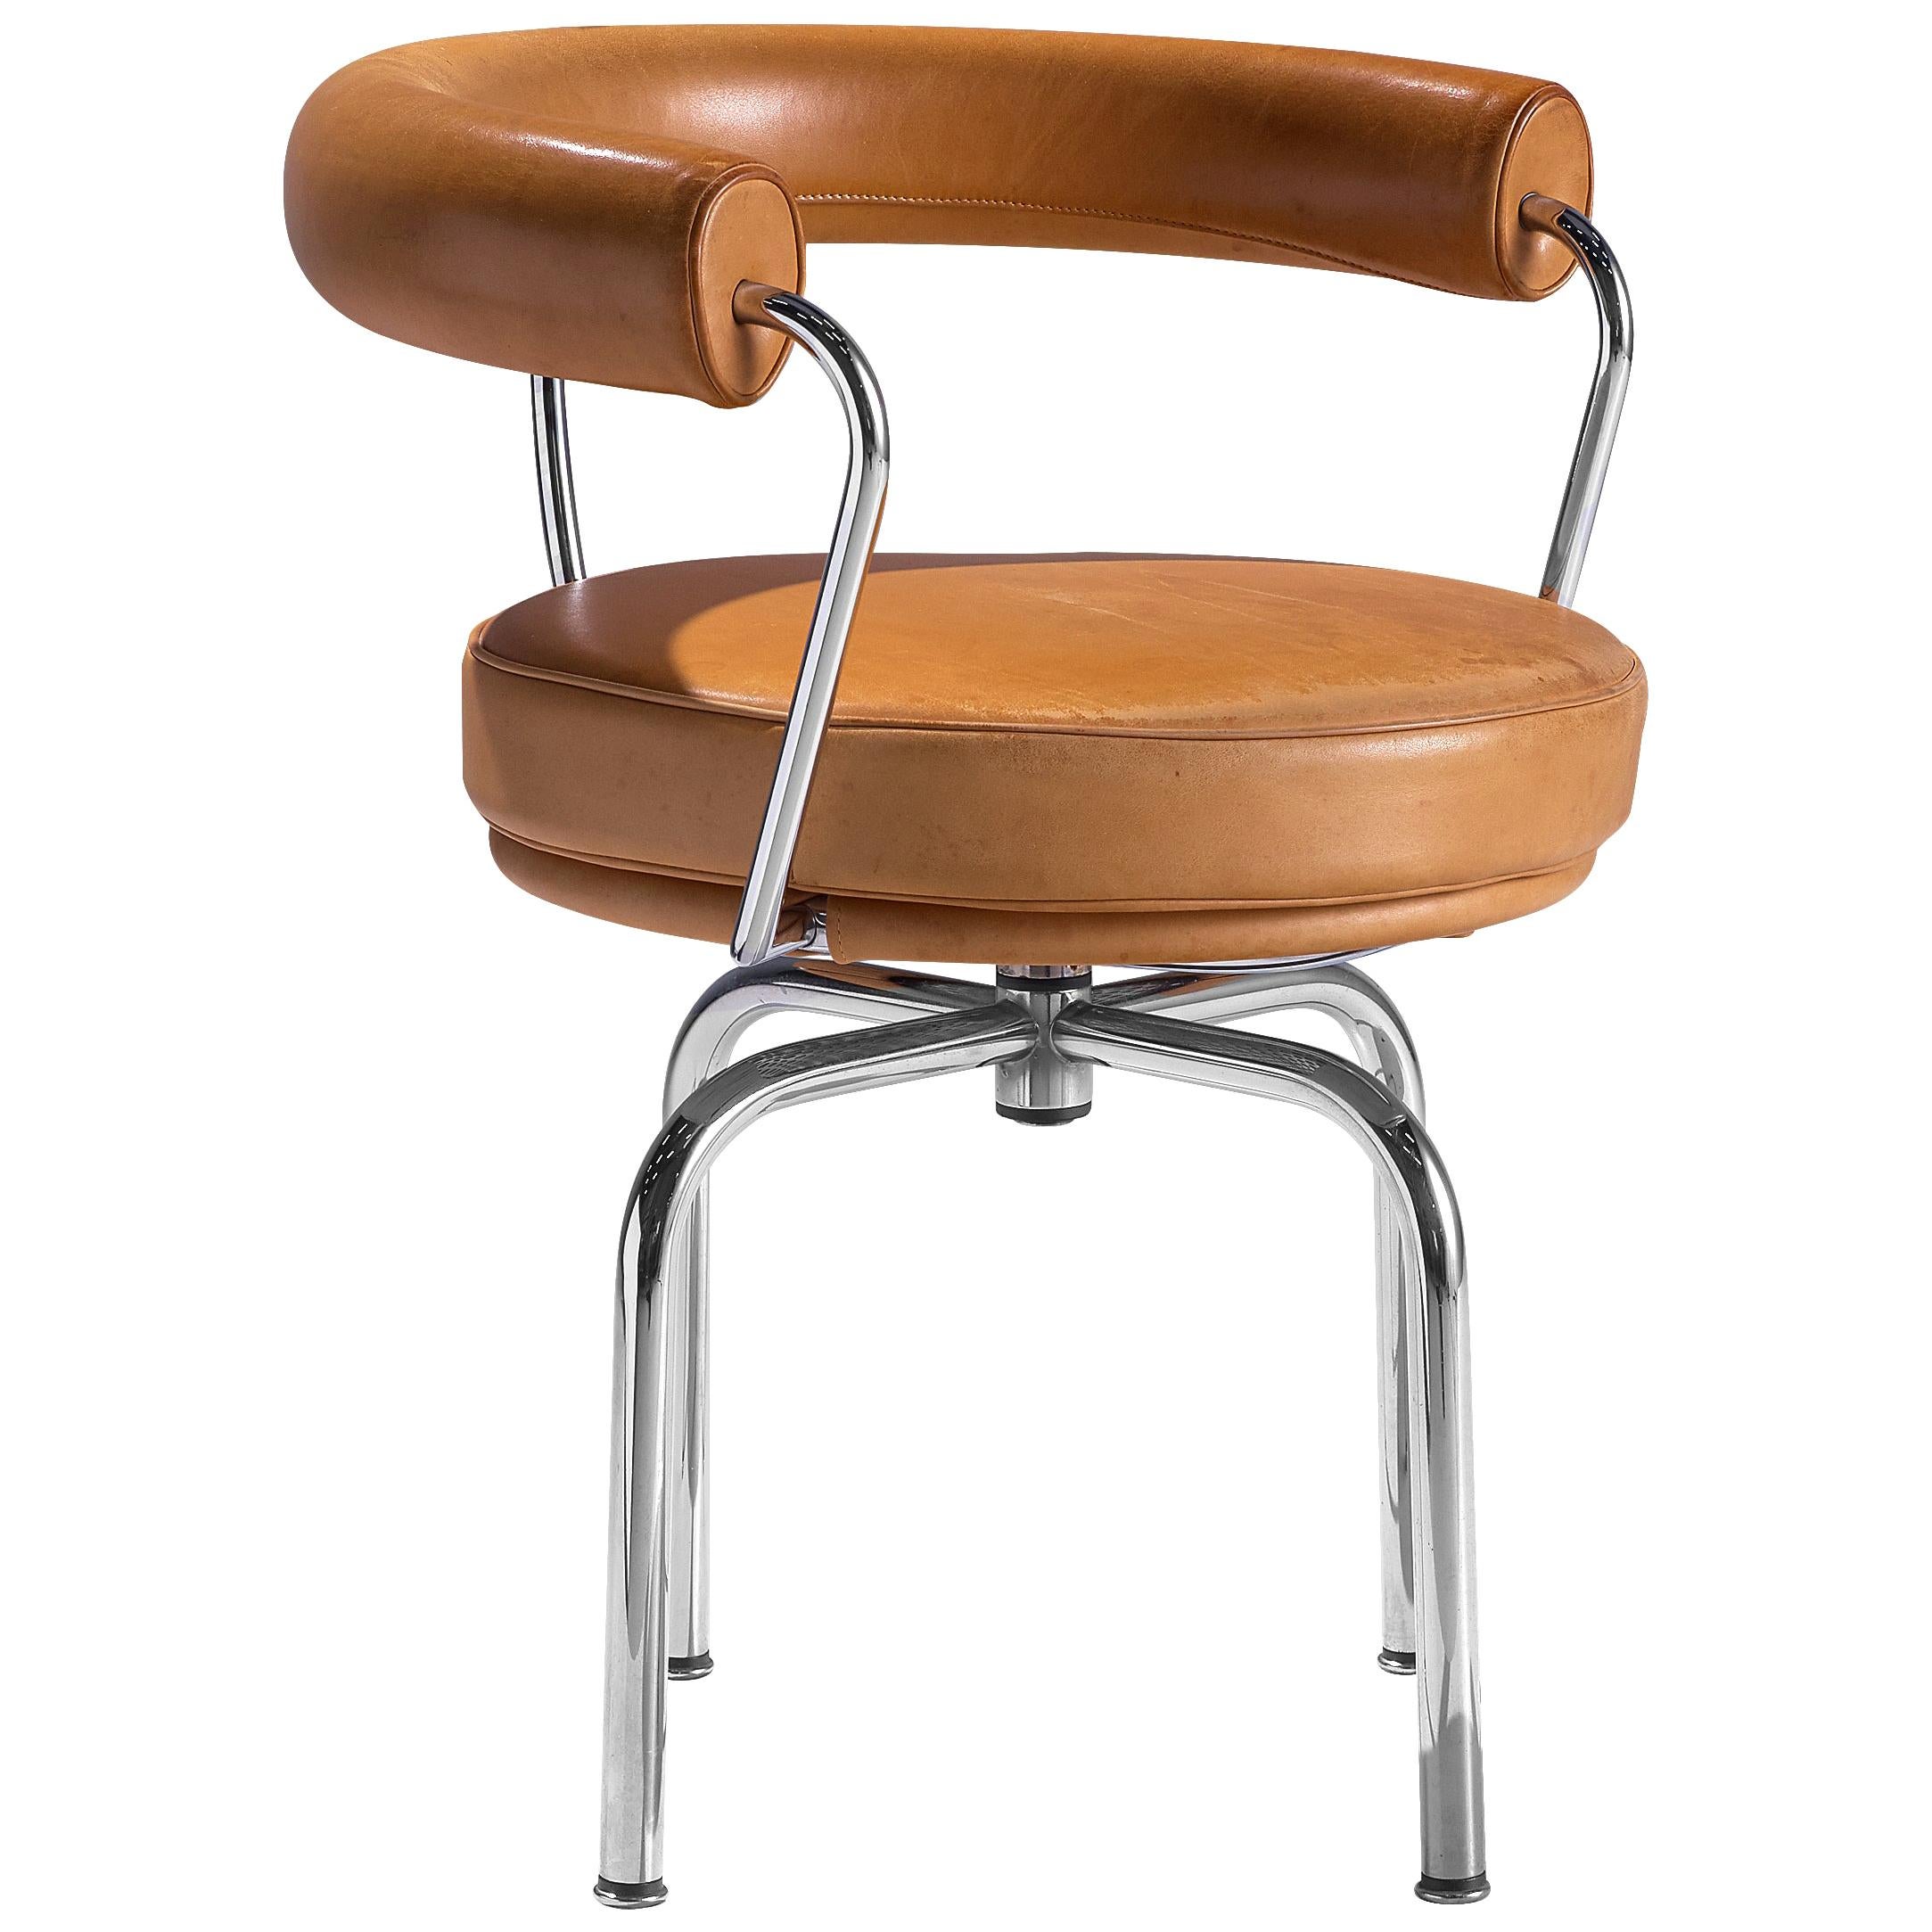 Iconic Charlotte Perriand 'LC7' Swivel Chair in Tubular Steel and Cognac Leather